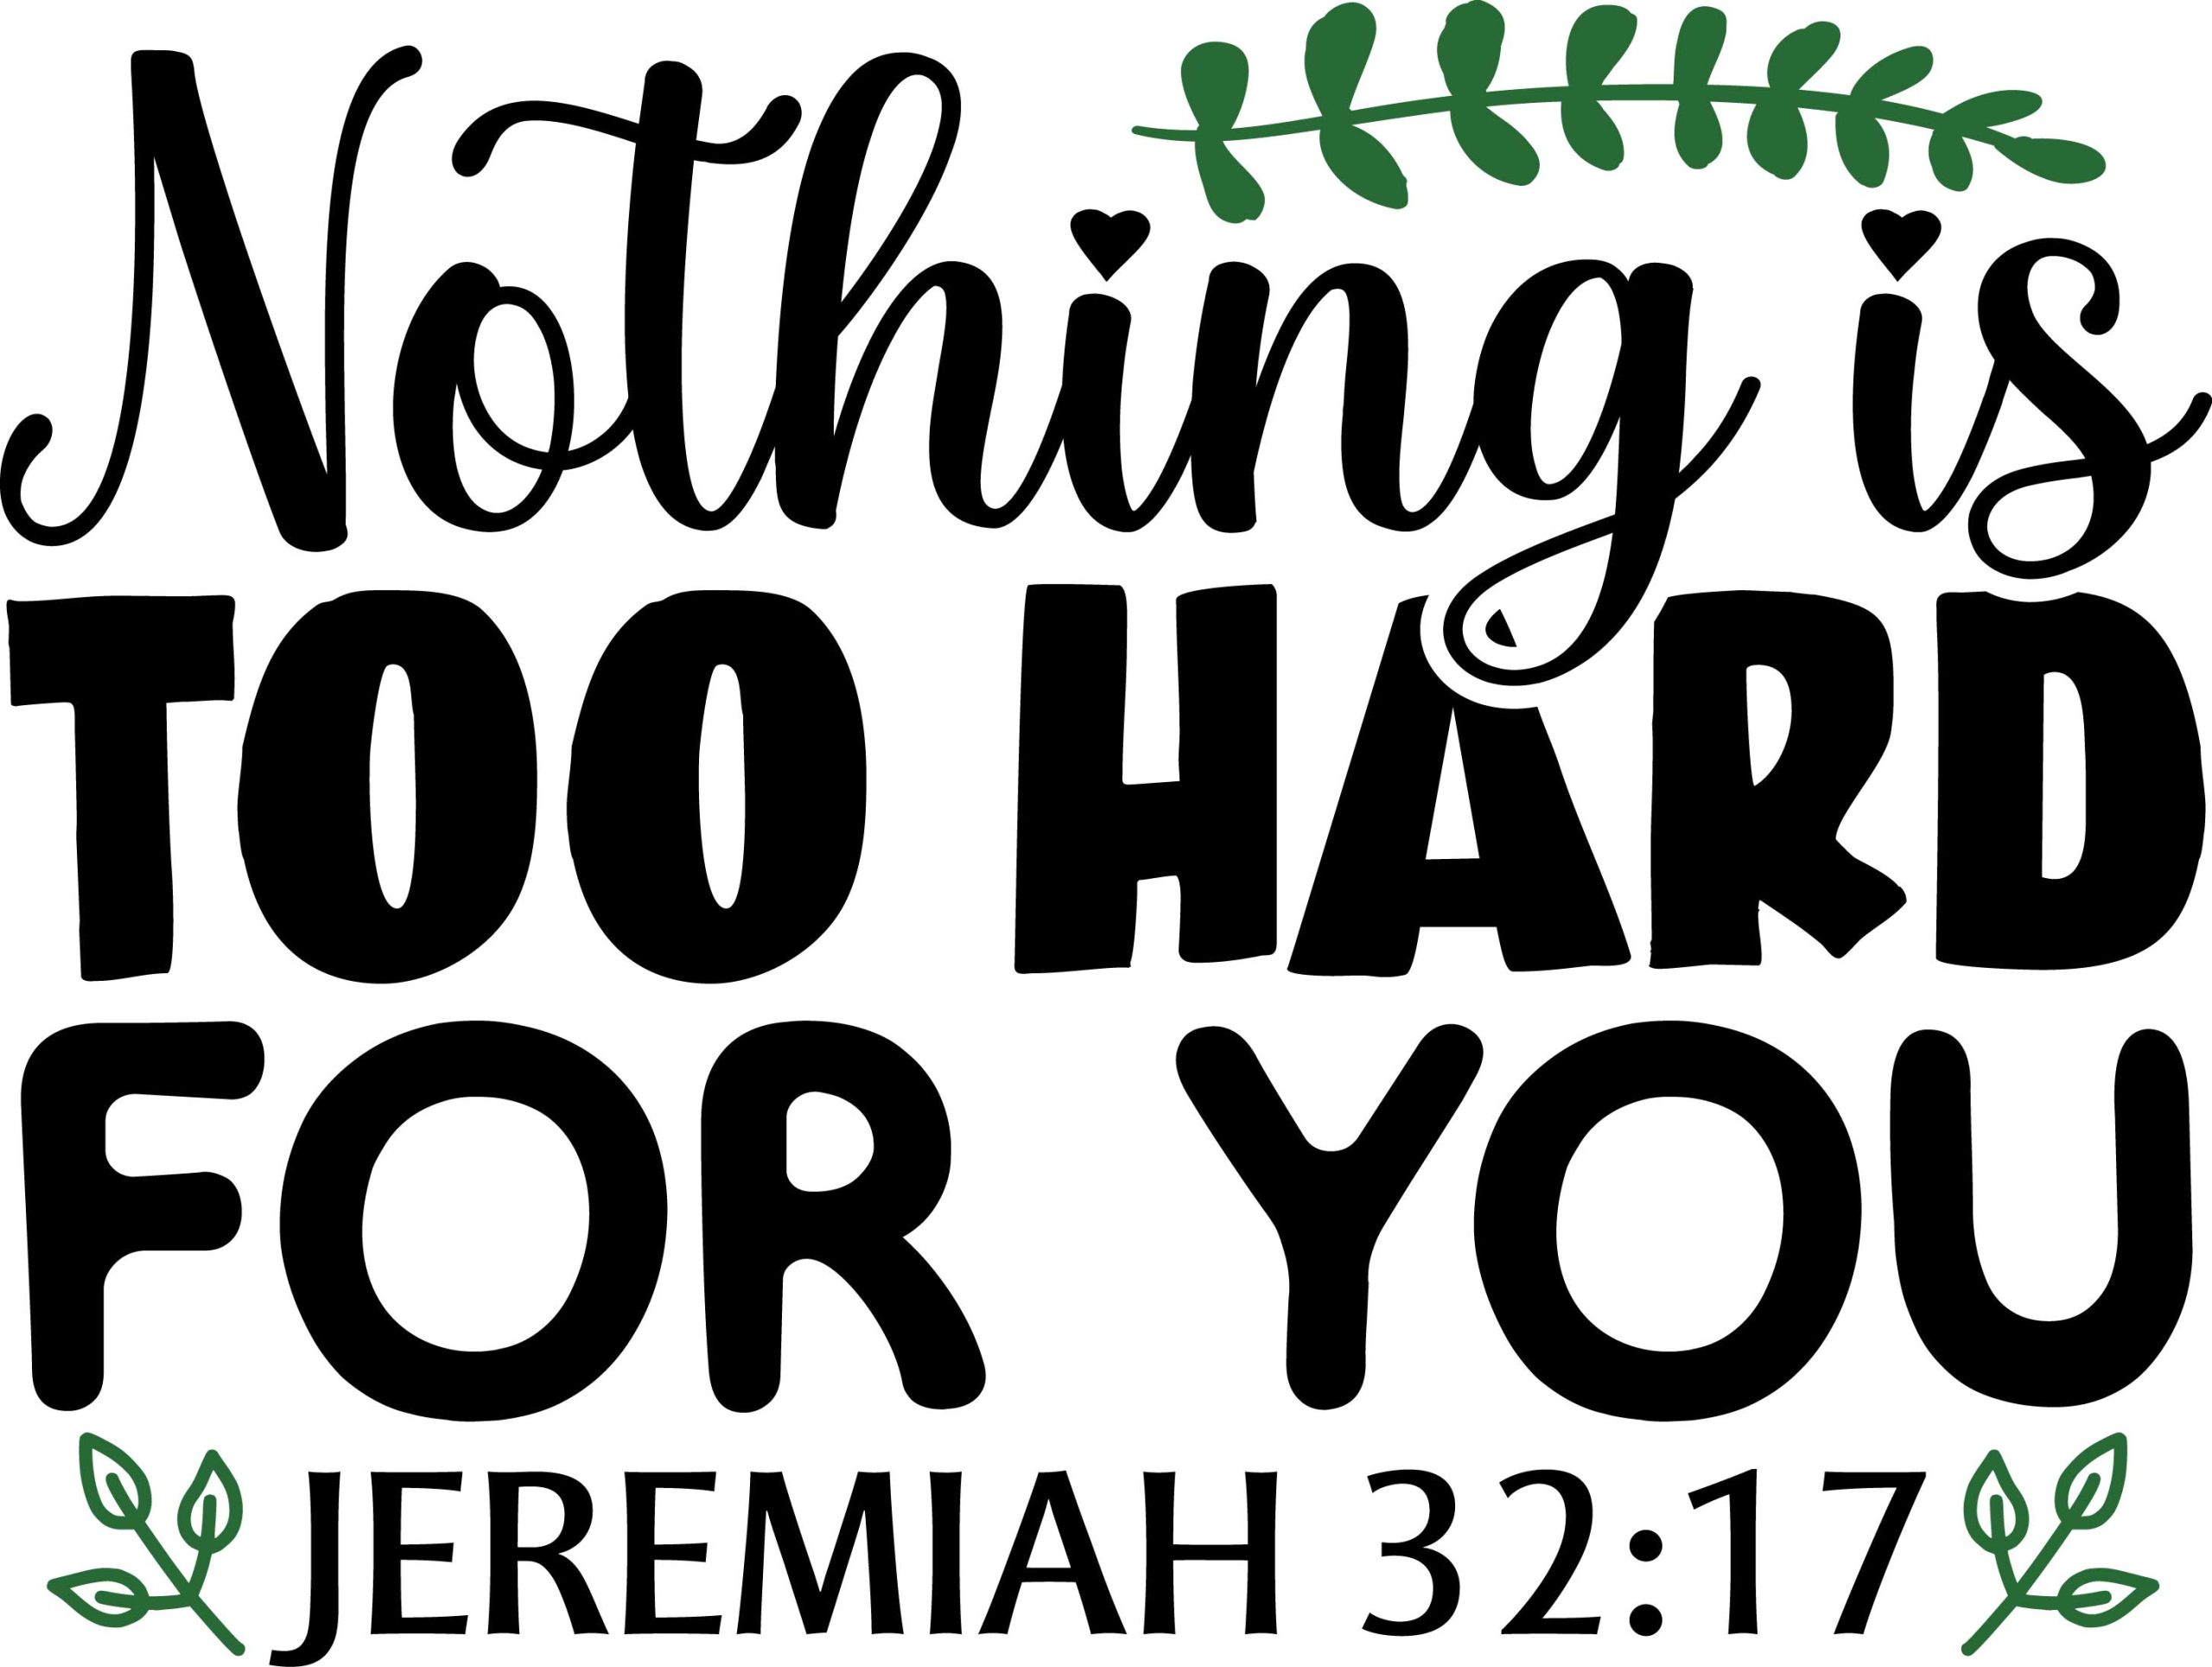 Nothing is too hard for you jeremiah 32:17, bible verses, scripture verses, svg files, passages, sayings, cricut designs, silhouette, embroidery, bundle, free cut files, design space, vector